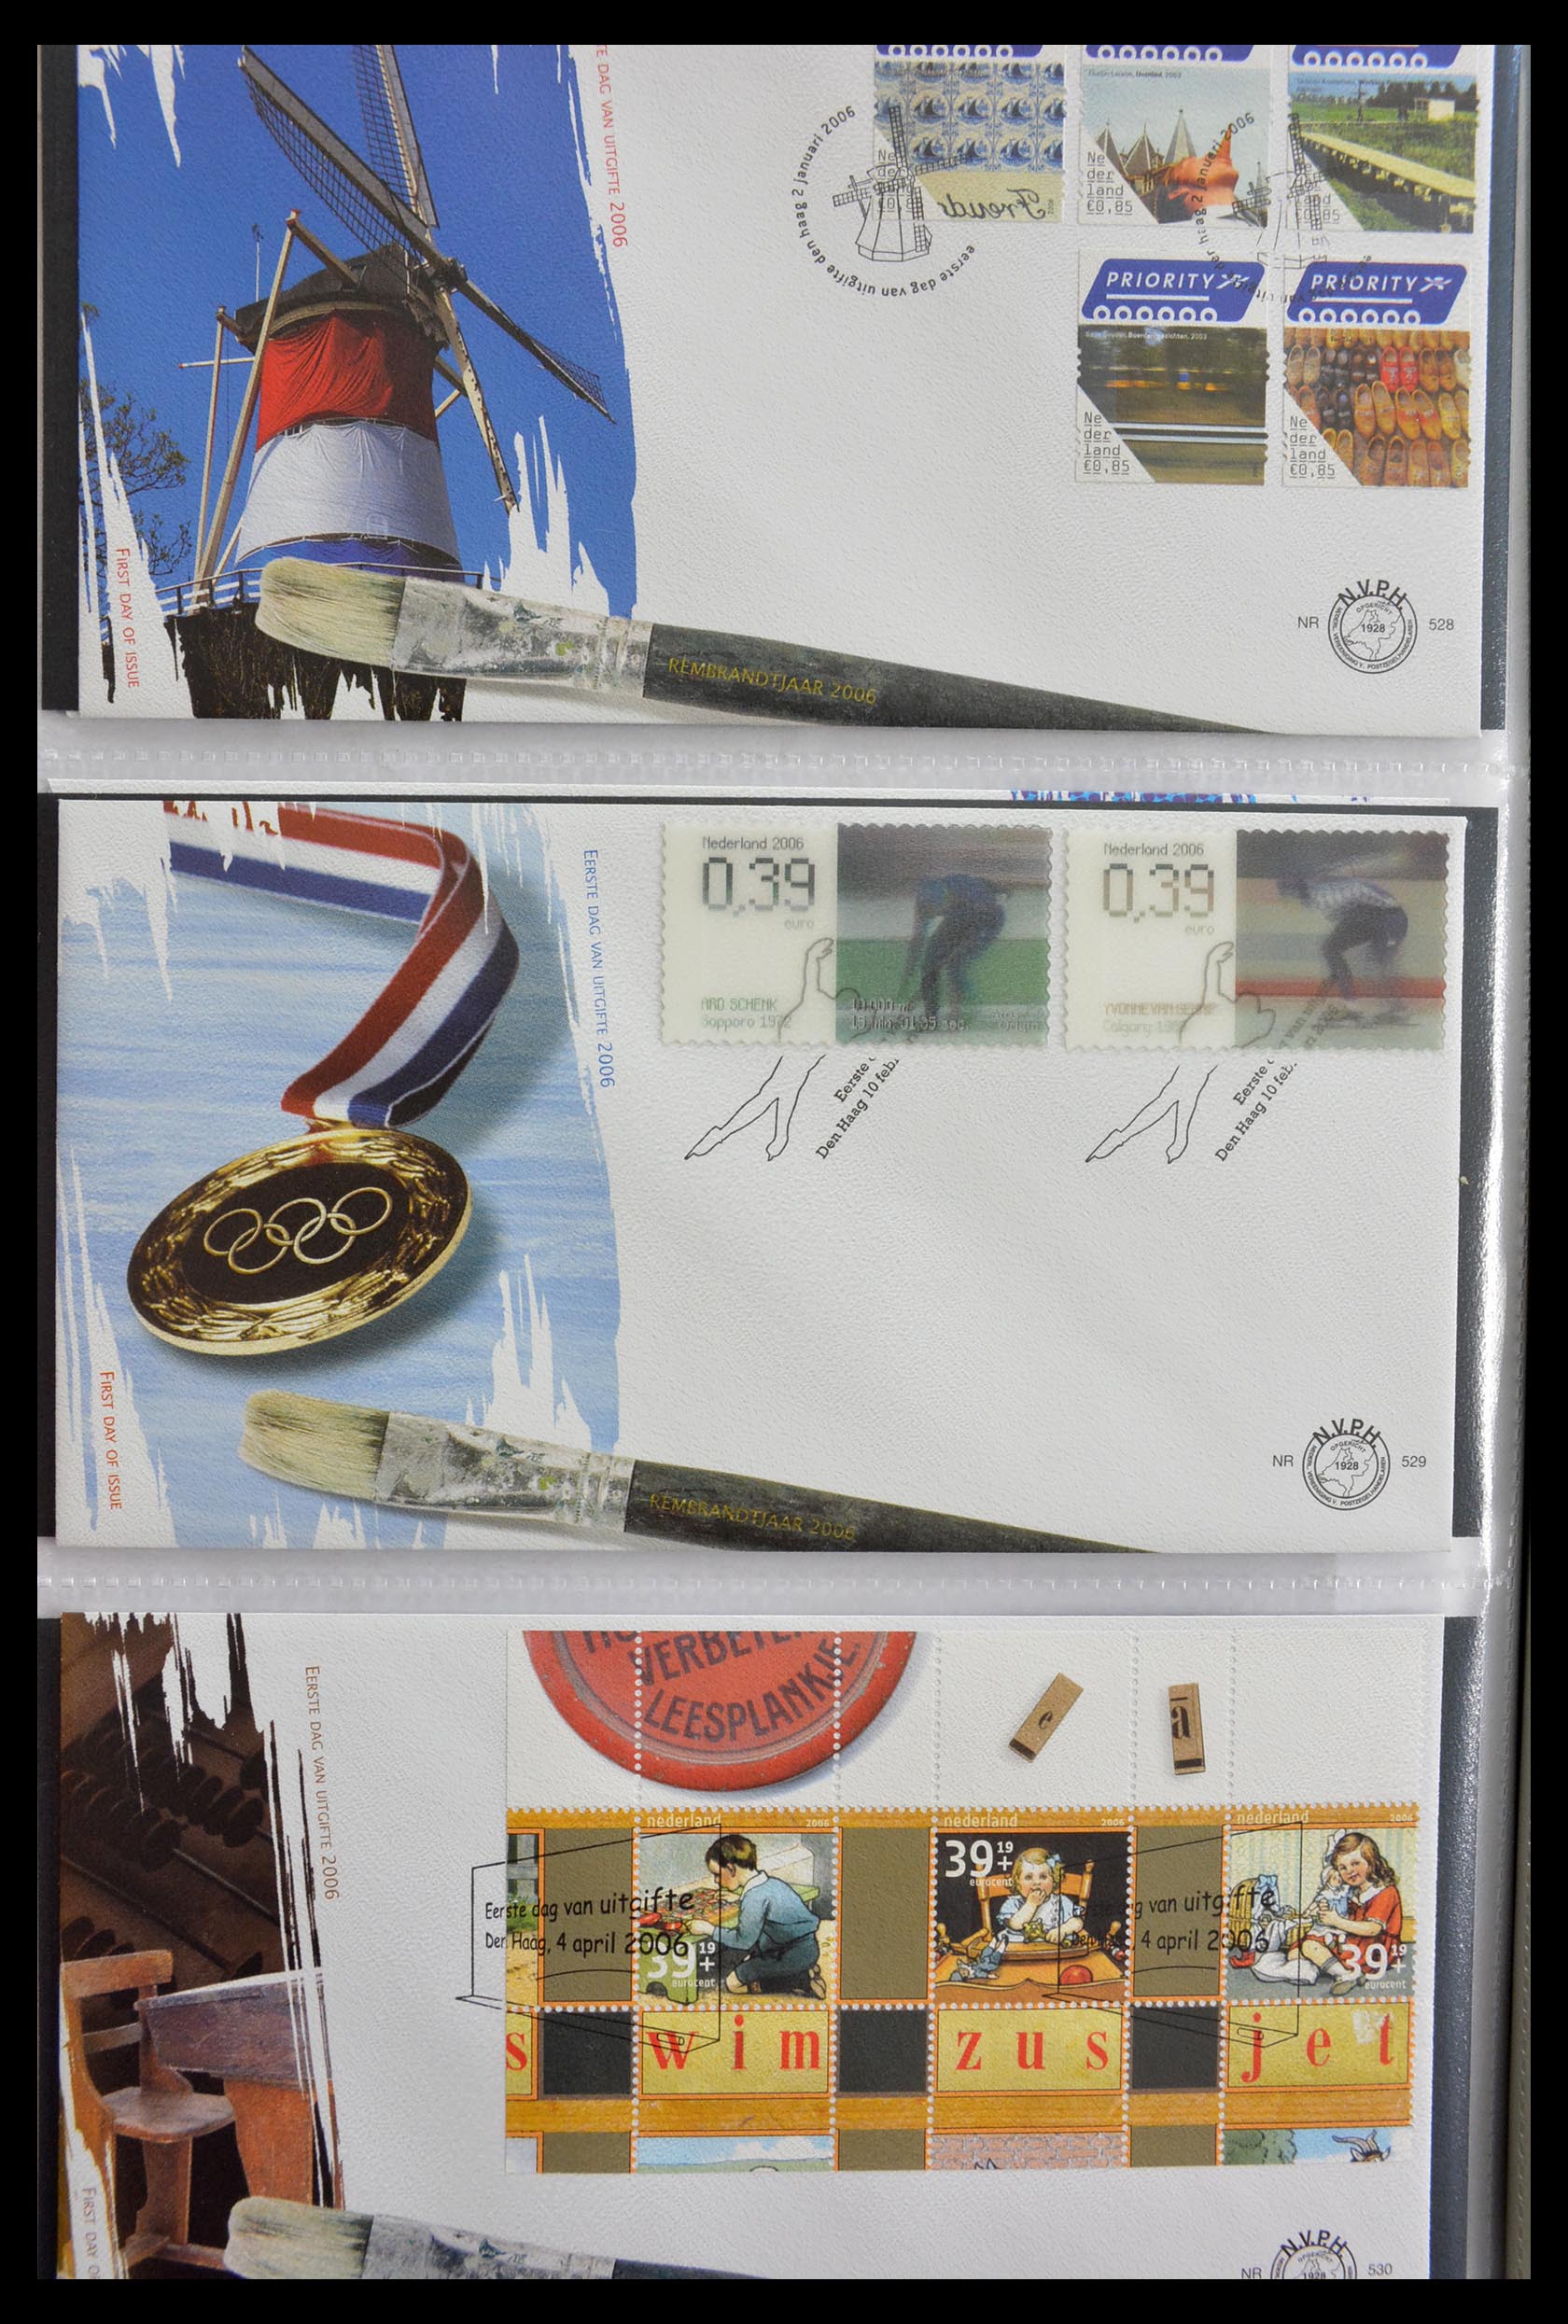 28999 045 - 28999 Netherlands FDC's 2001-2012.